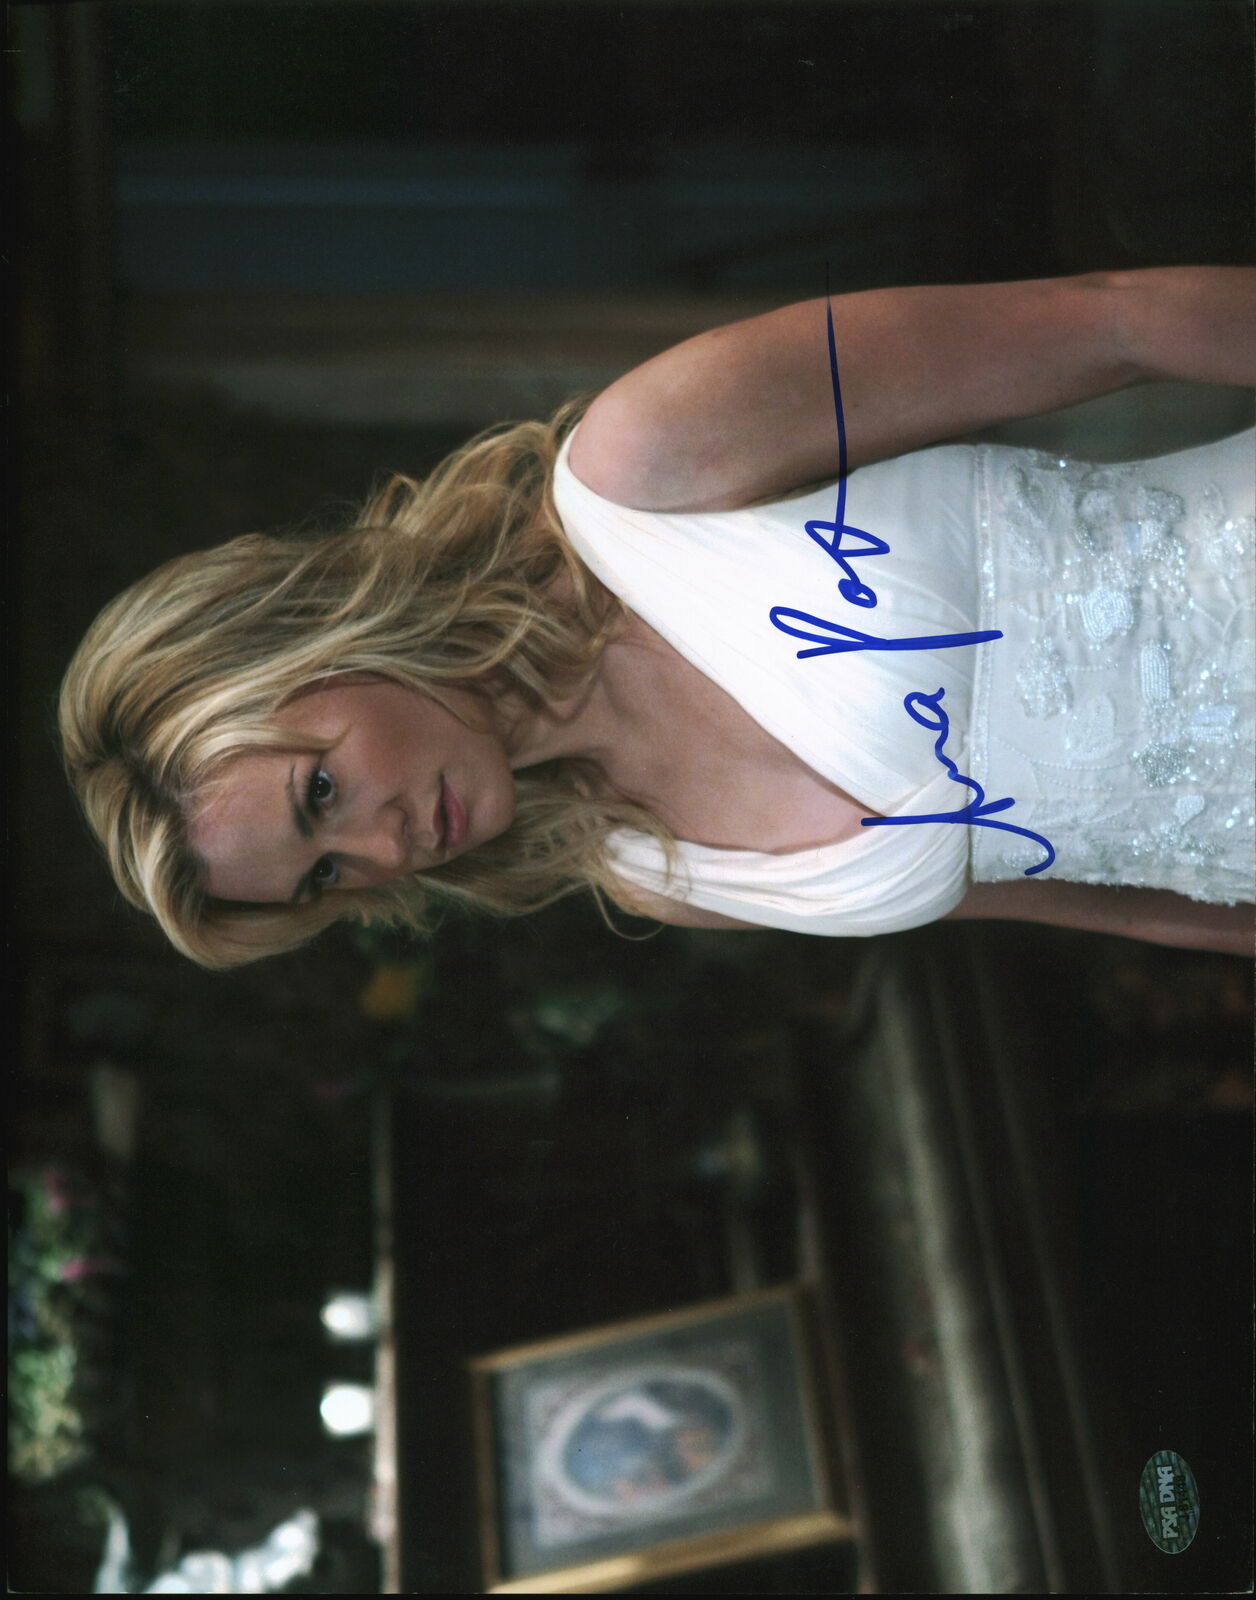 Anna Paquin True Blood Authentic Signed 11x14 Photo Poster painting Autographed PSA/DNA #J81448